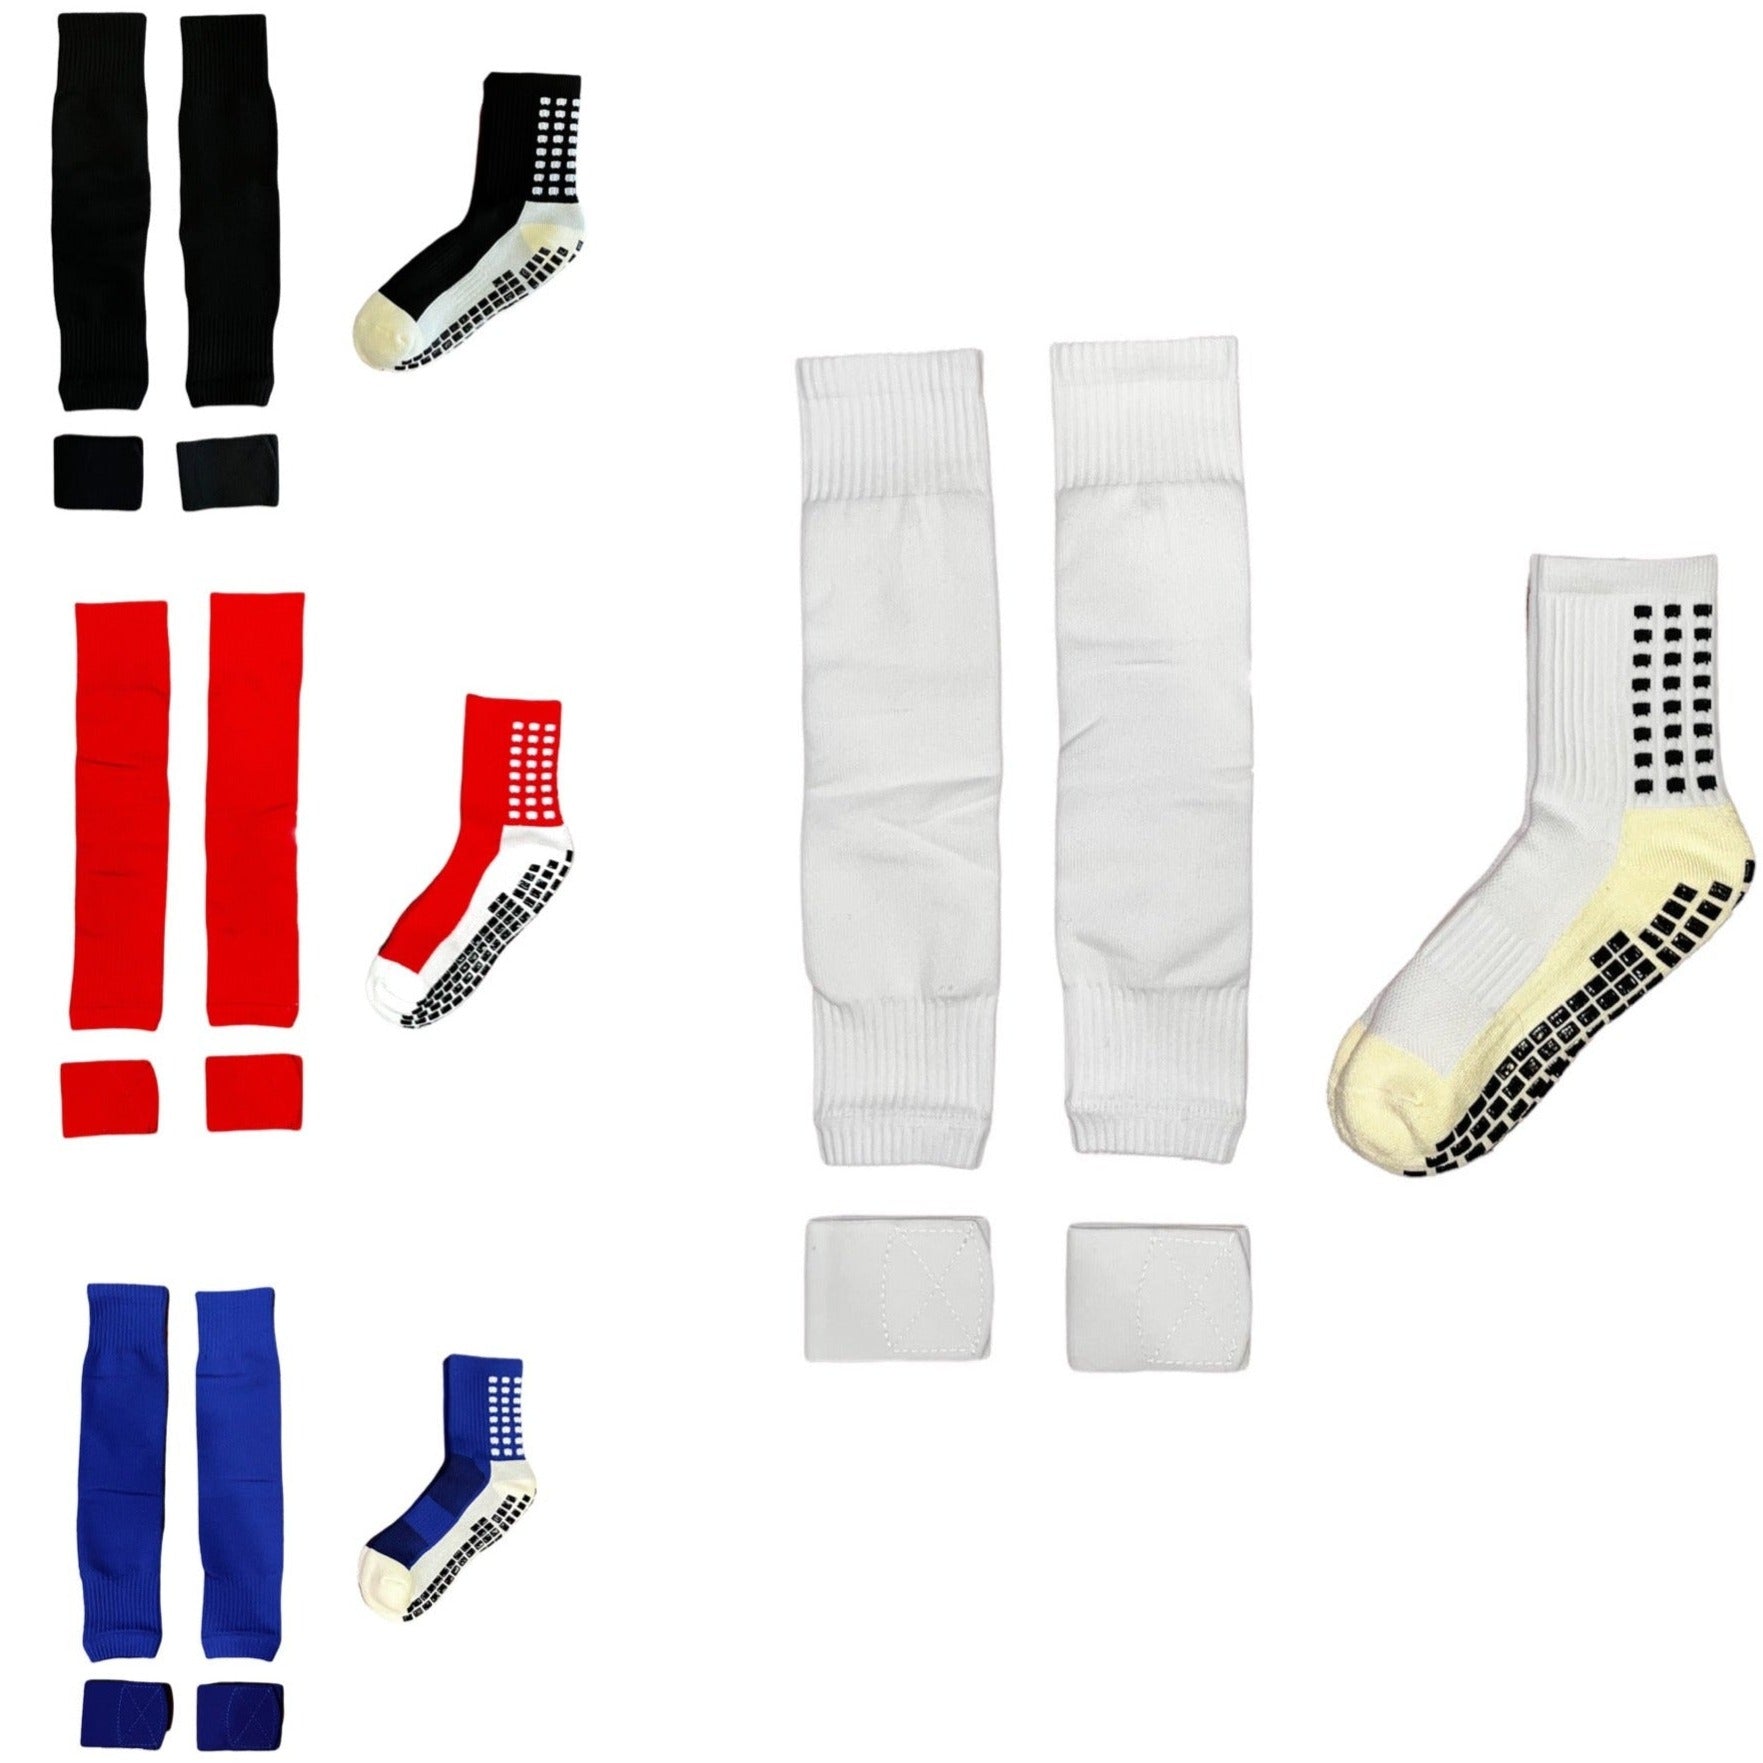 Why Should Players Use Grip Socks? Do They Make a Difference?